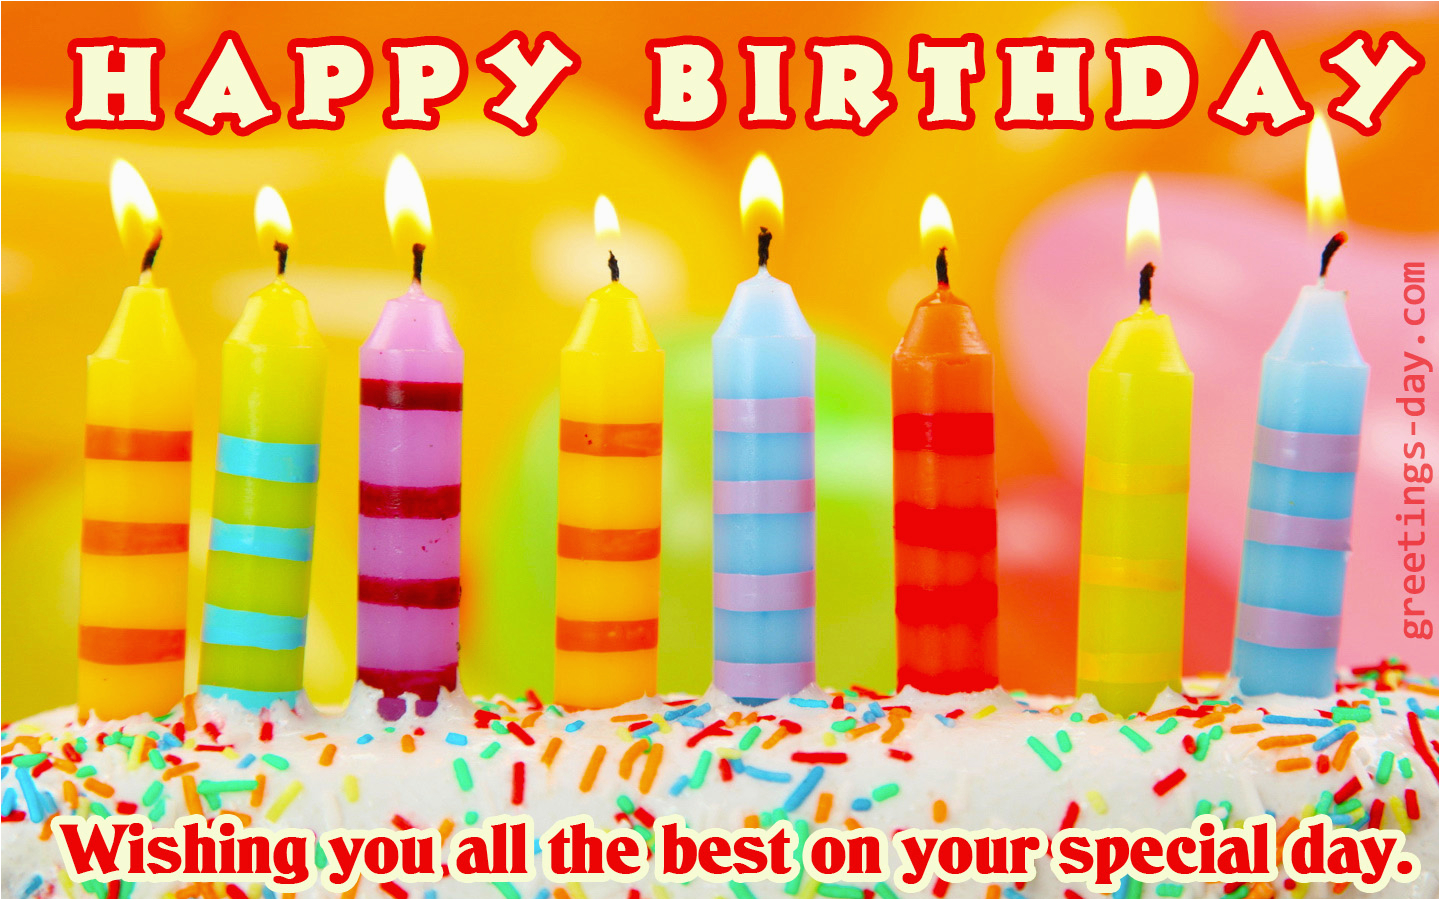 free-e-cards-for-birthdays-happy-birthday-for-friends-free-ecards-and-pics-birthdaybuzz